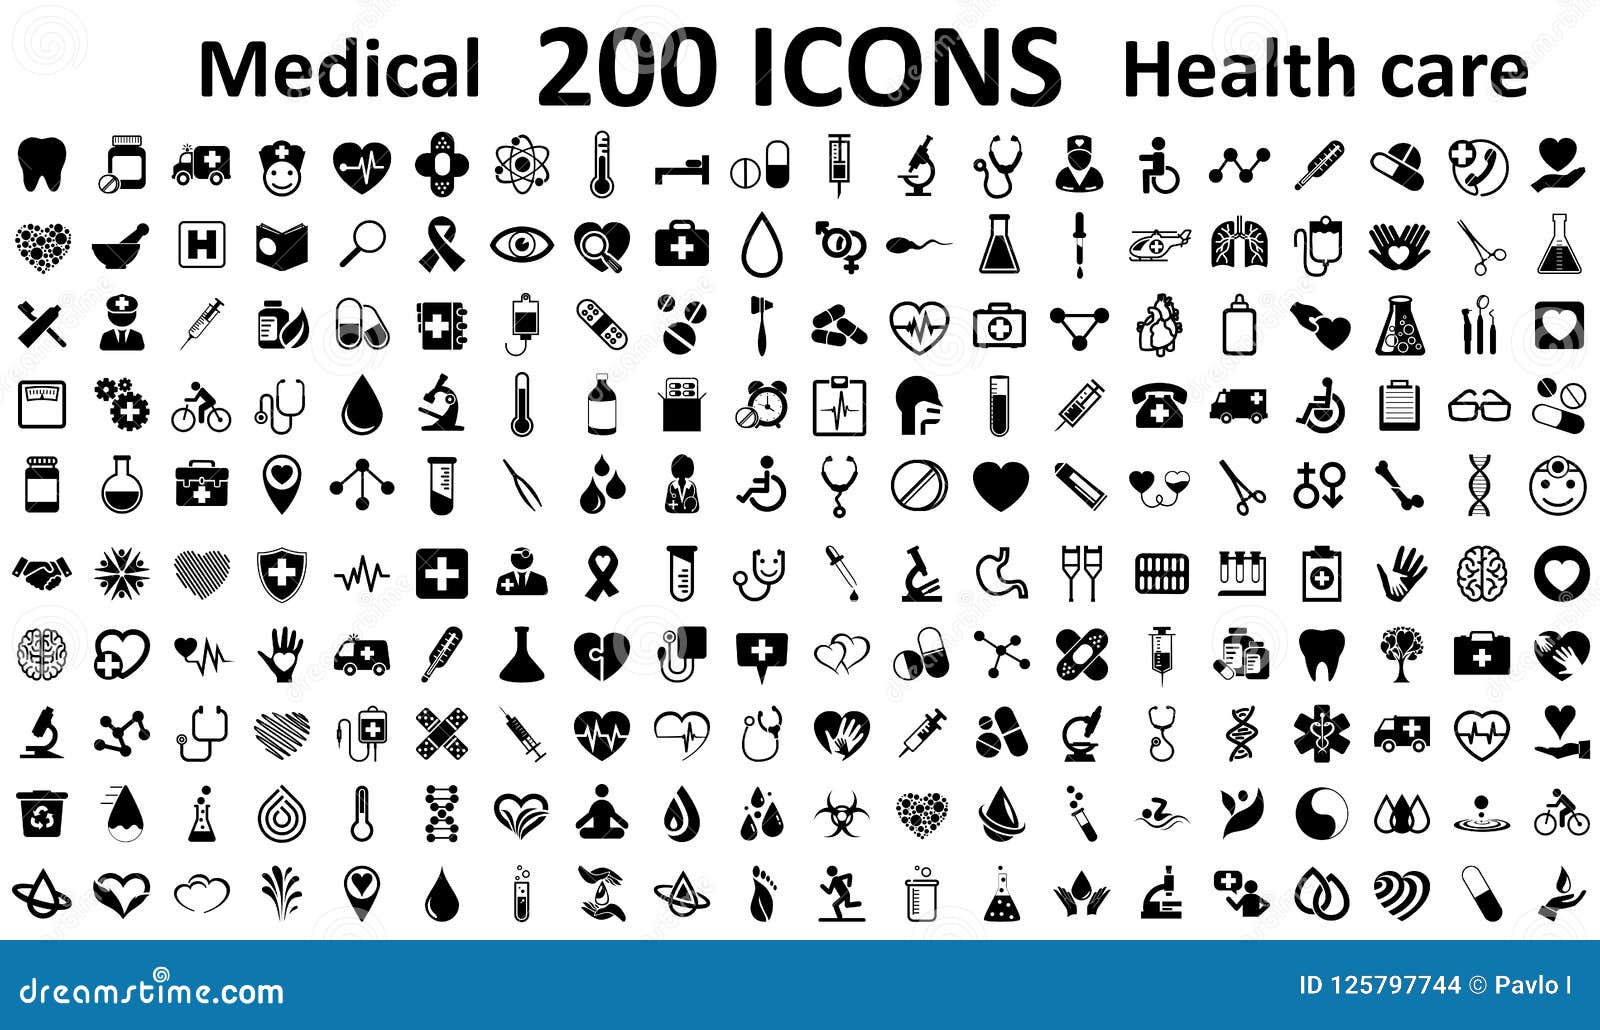 set 200 medecine and health flat icons. collection health care medical sign icons